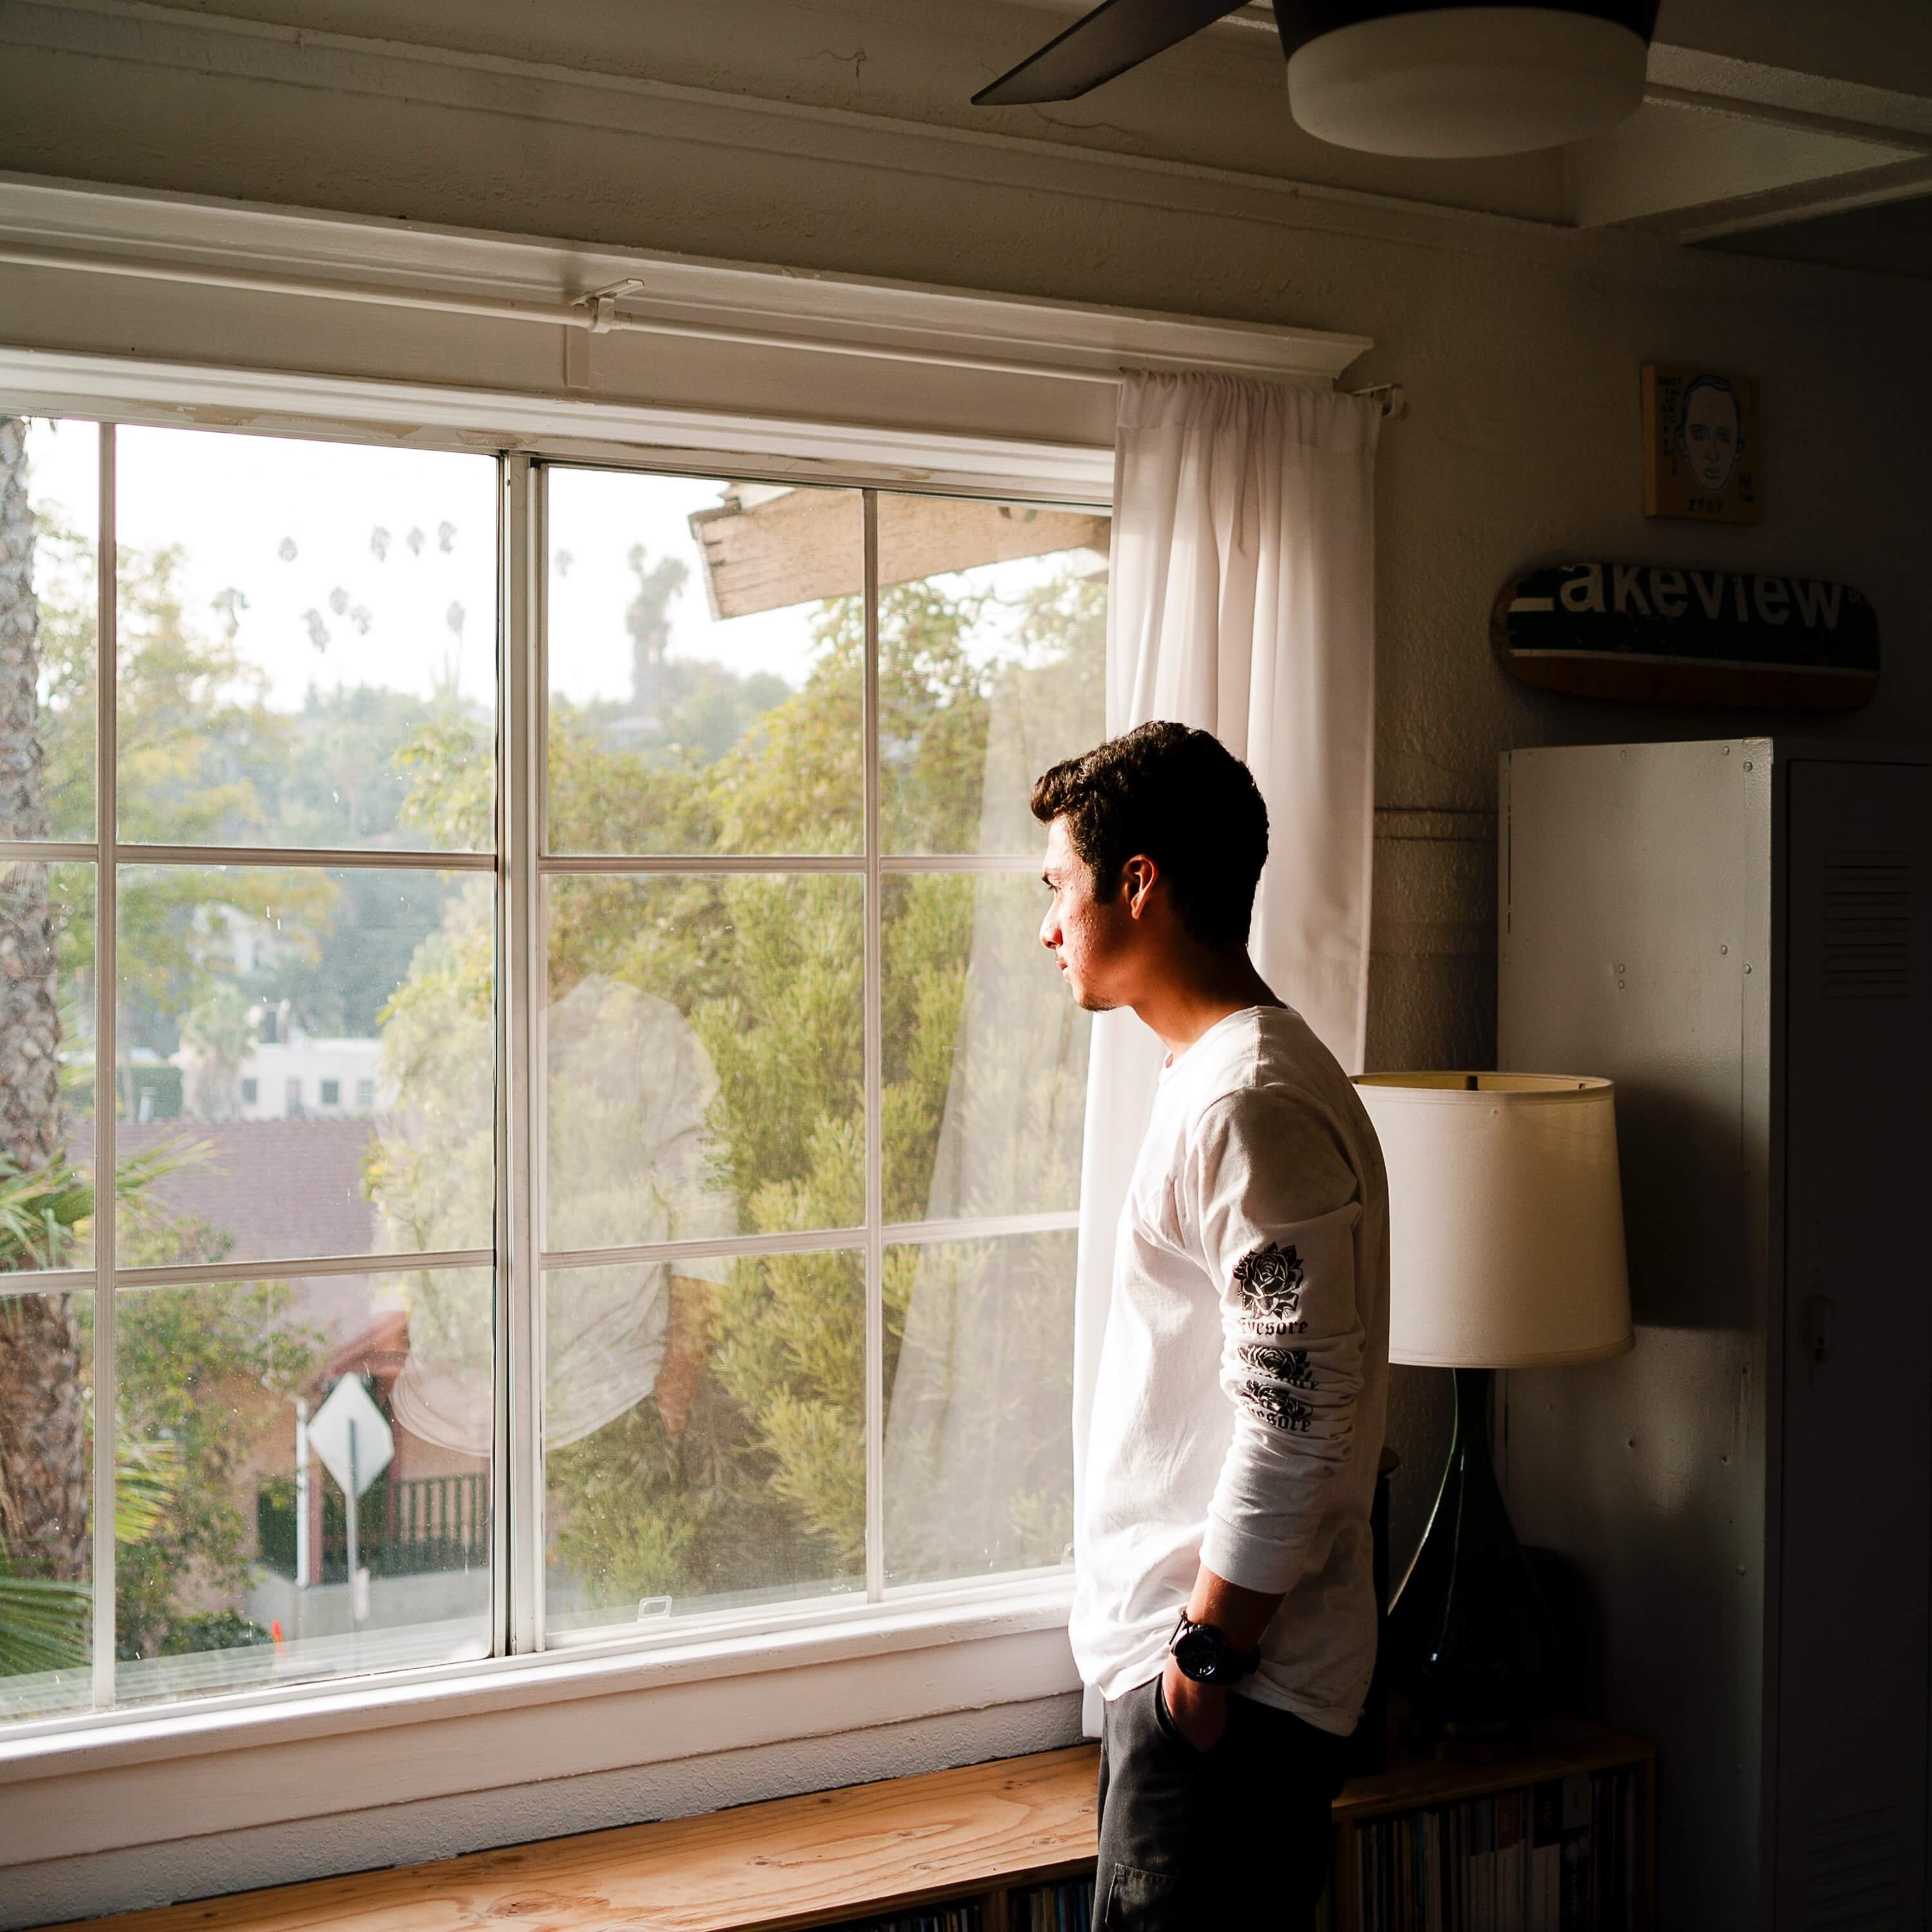 A man looking out of a set of windows.